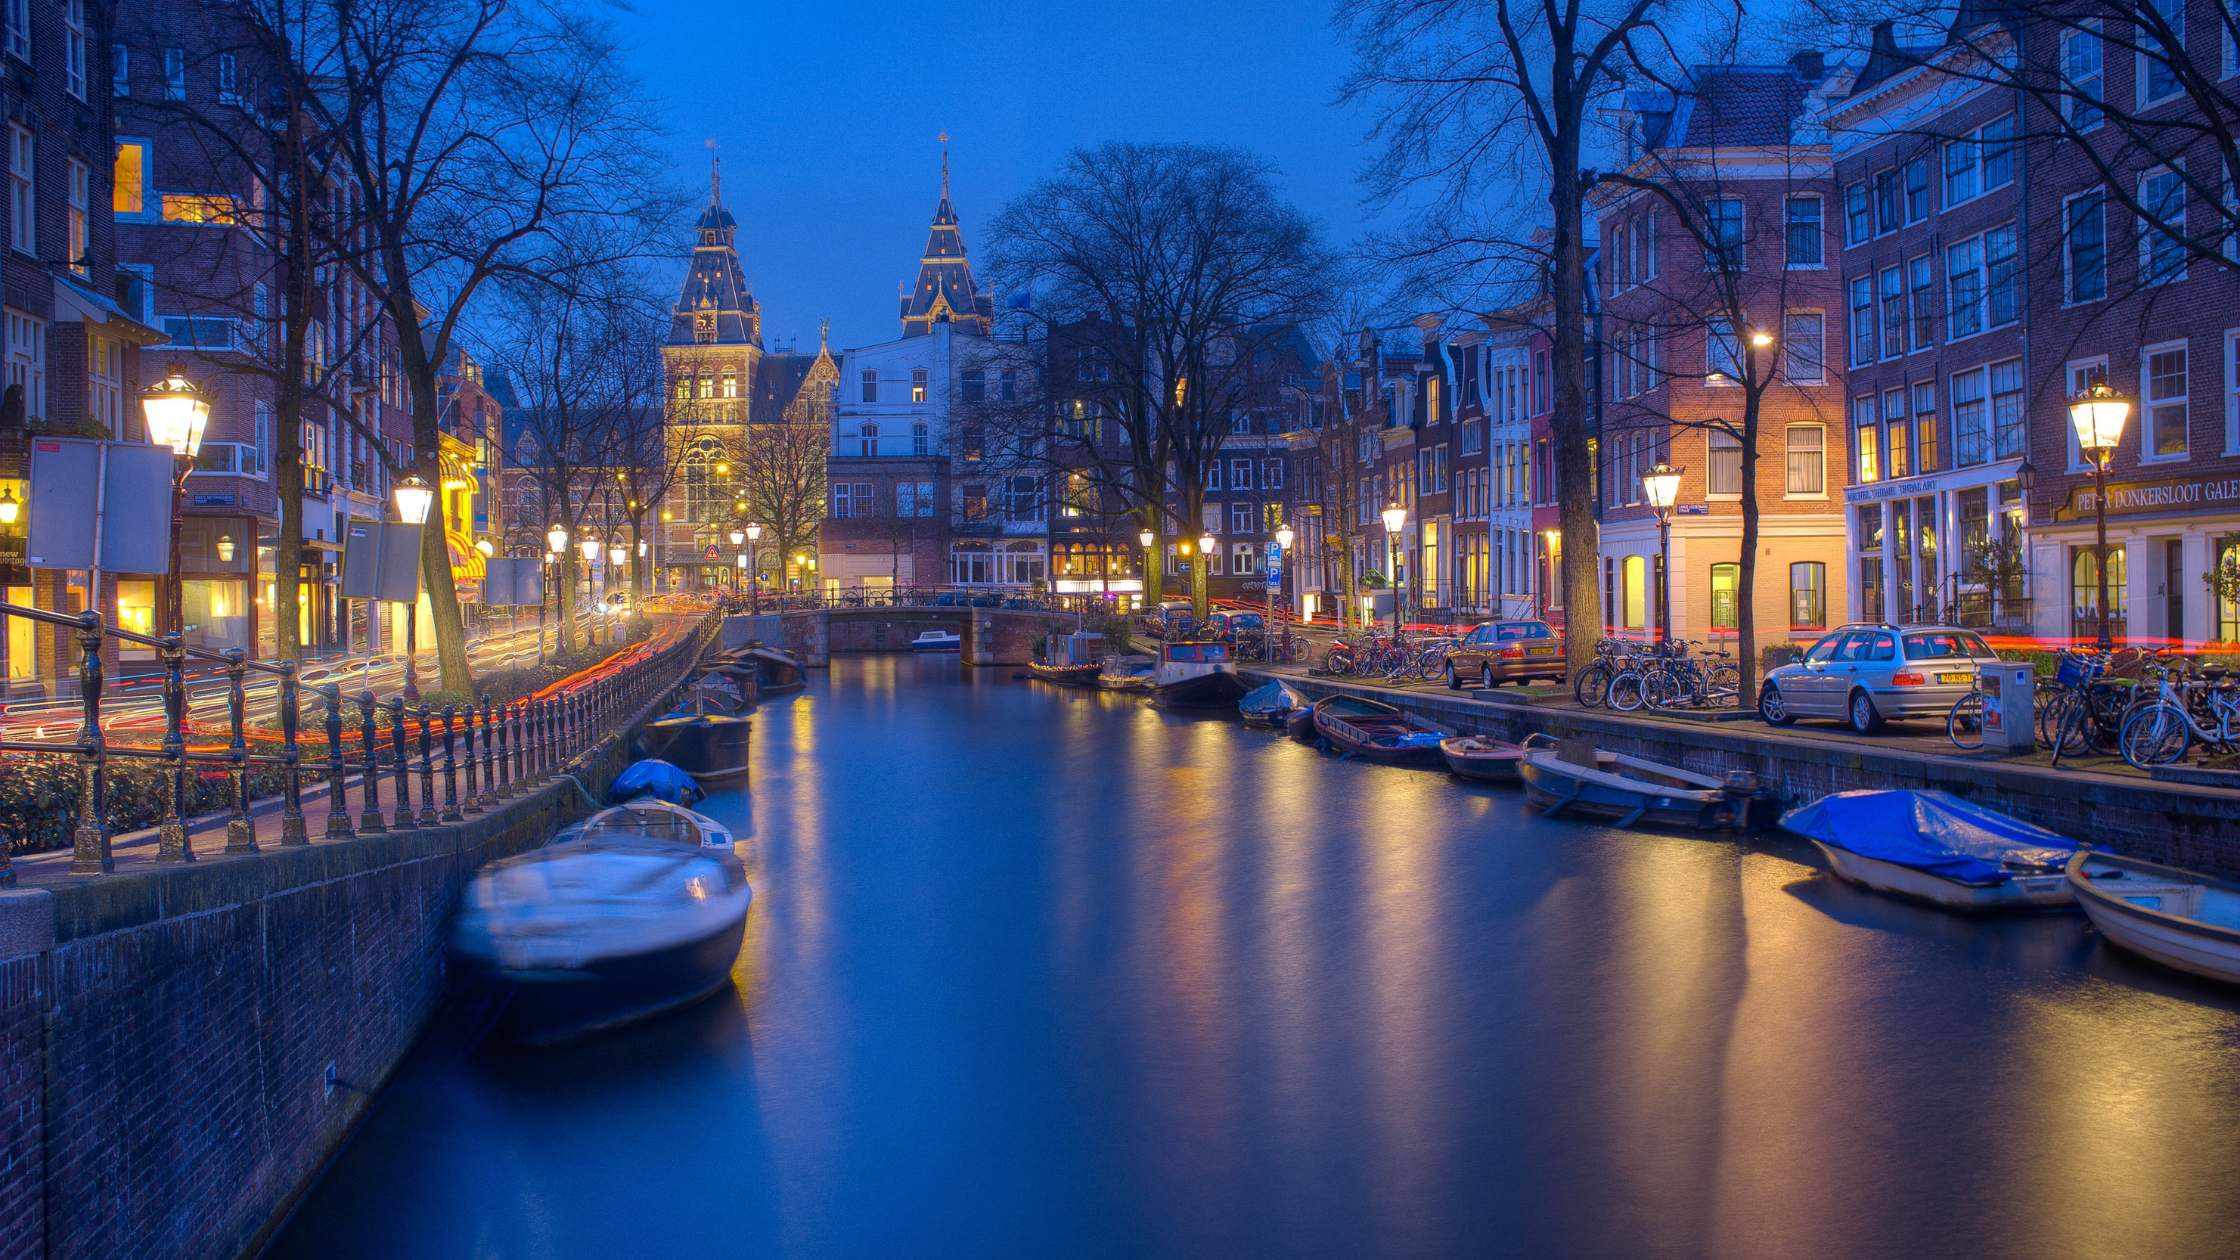 When planning a trip to the Netherlands, include these PLACES TO VISIT IN AMSTERDAM to experience the best of the city's history, art, and culture.